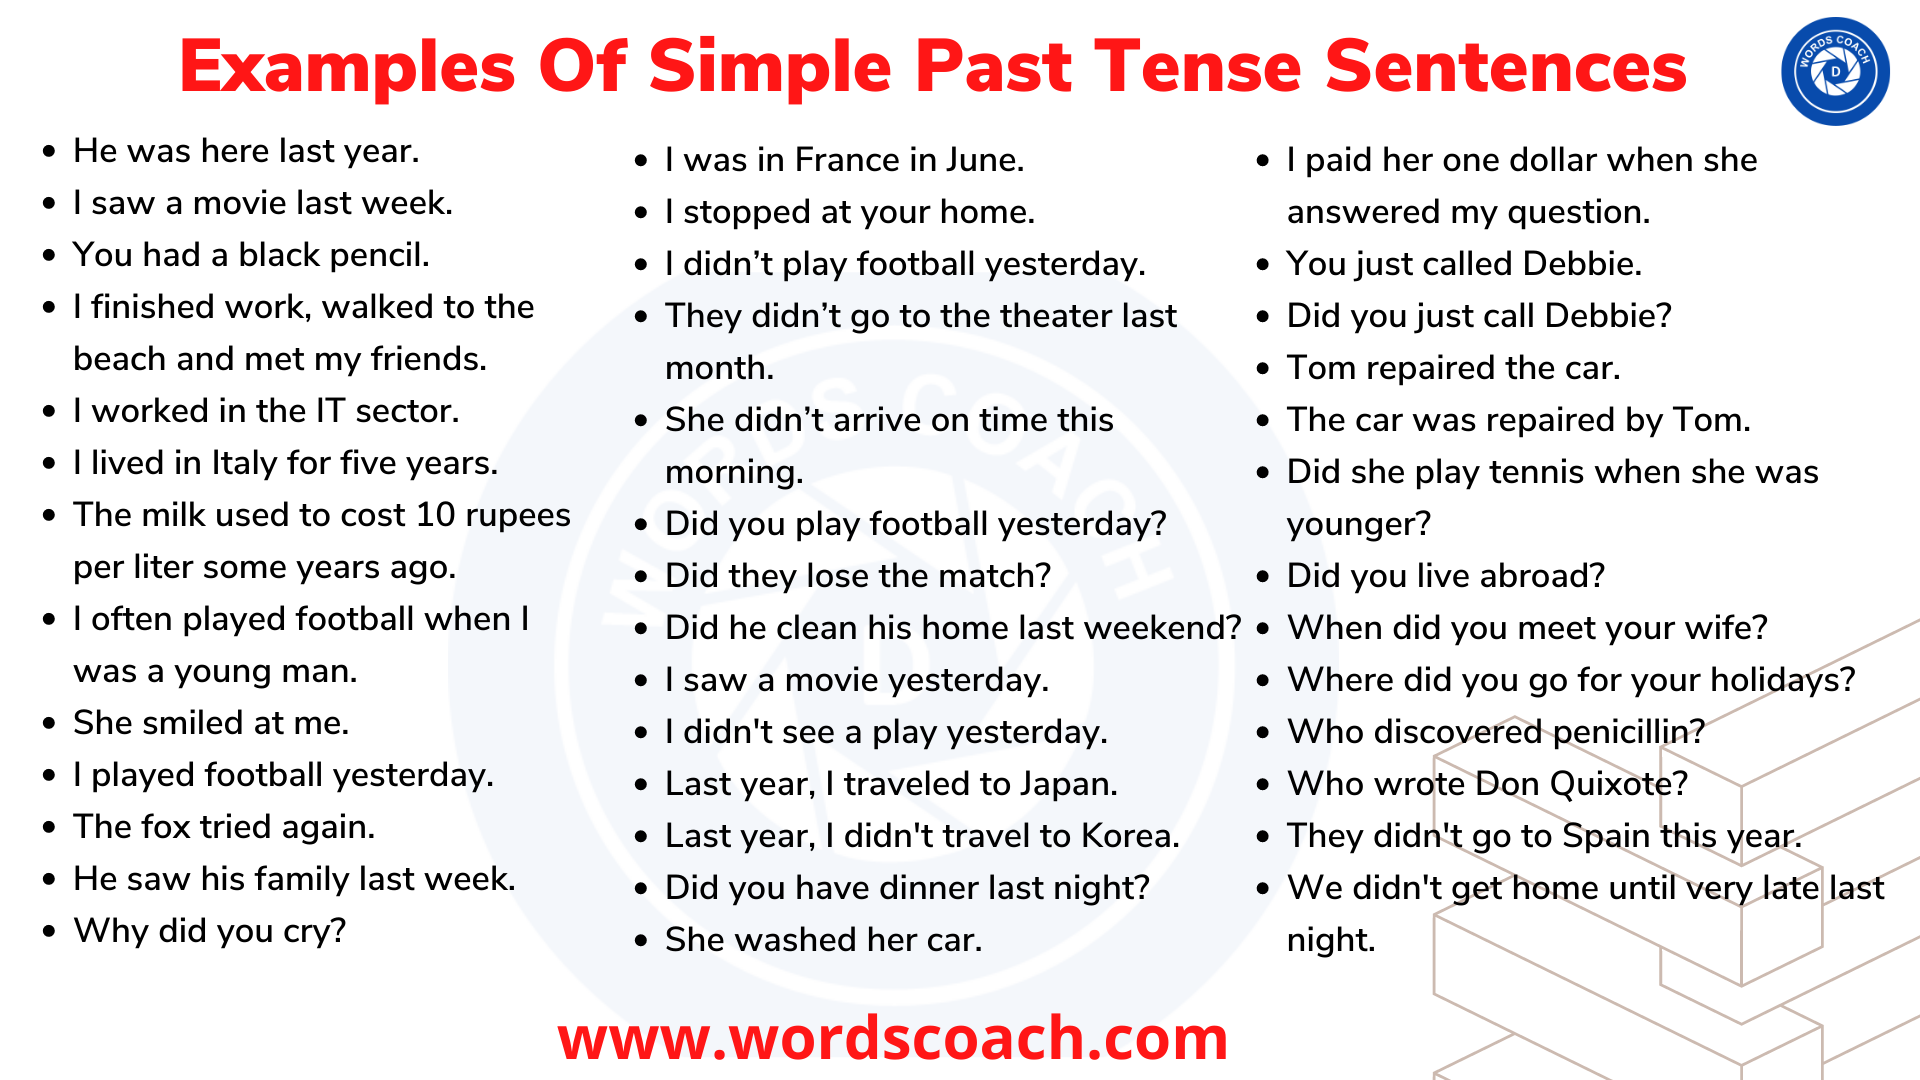 Examples Of Simple Past Tense Sentences